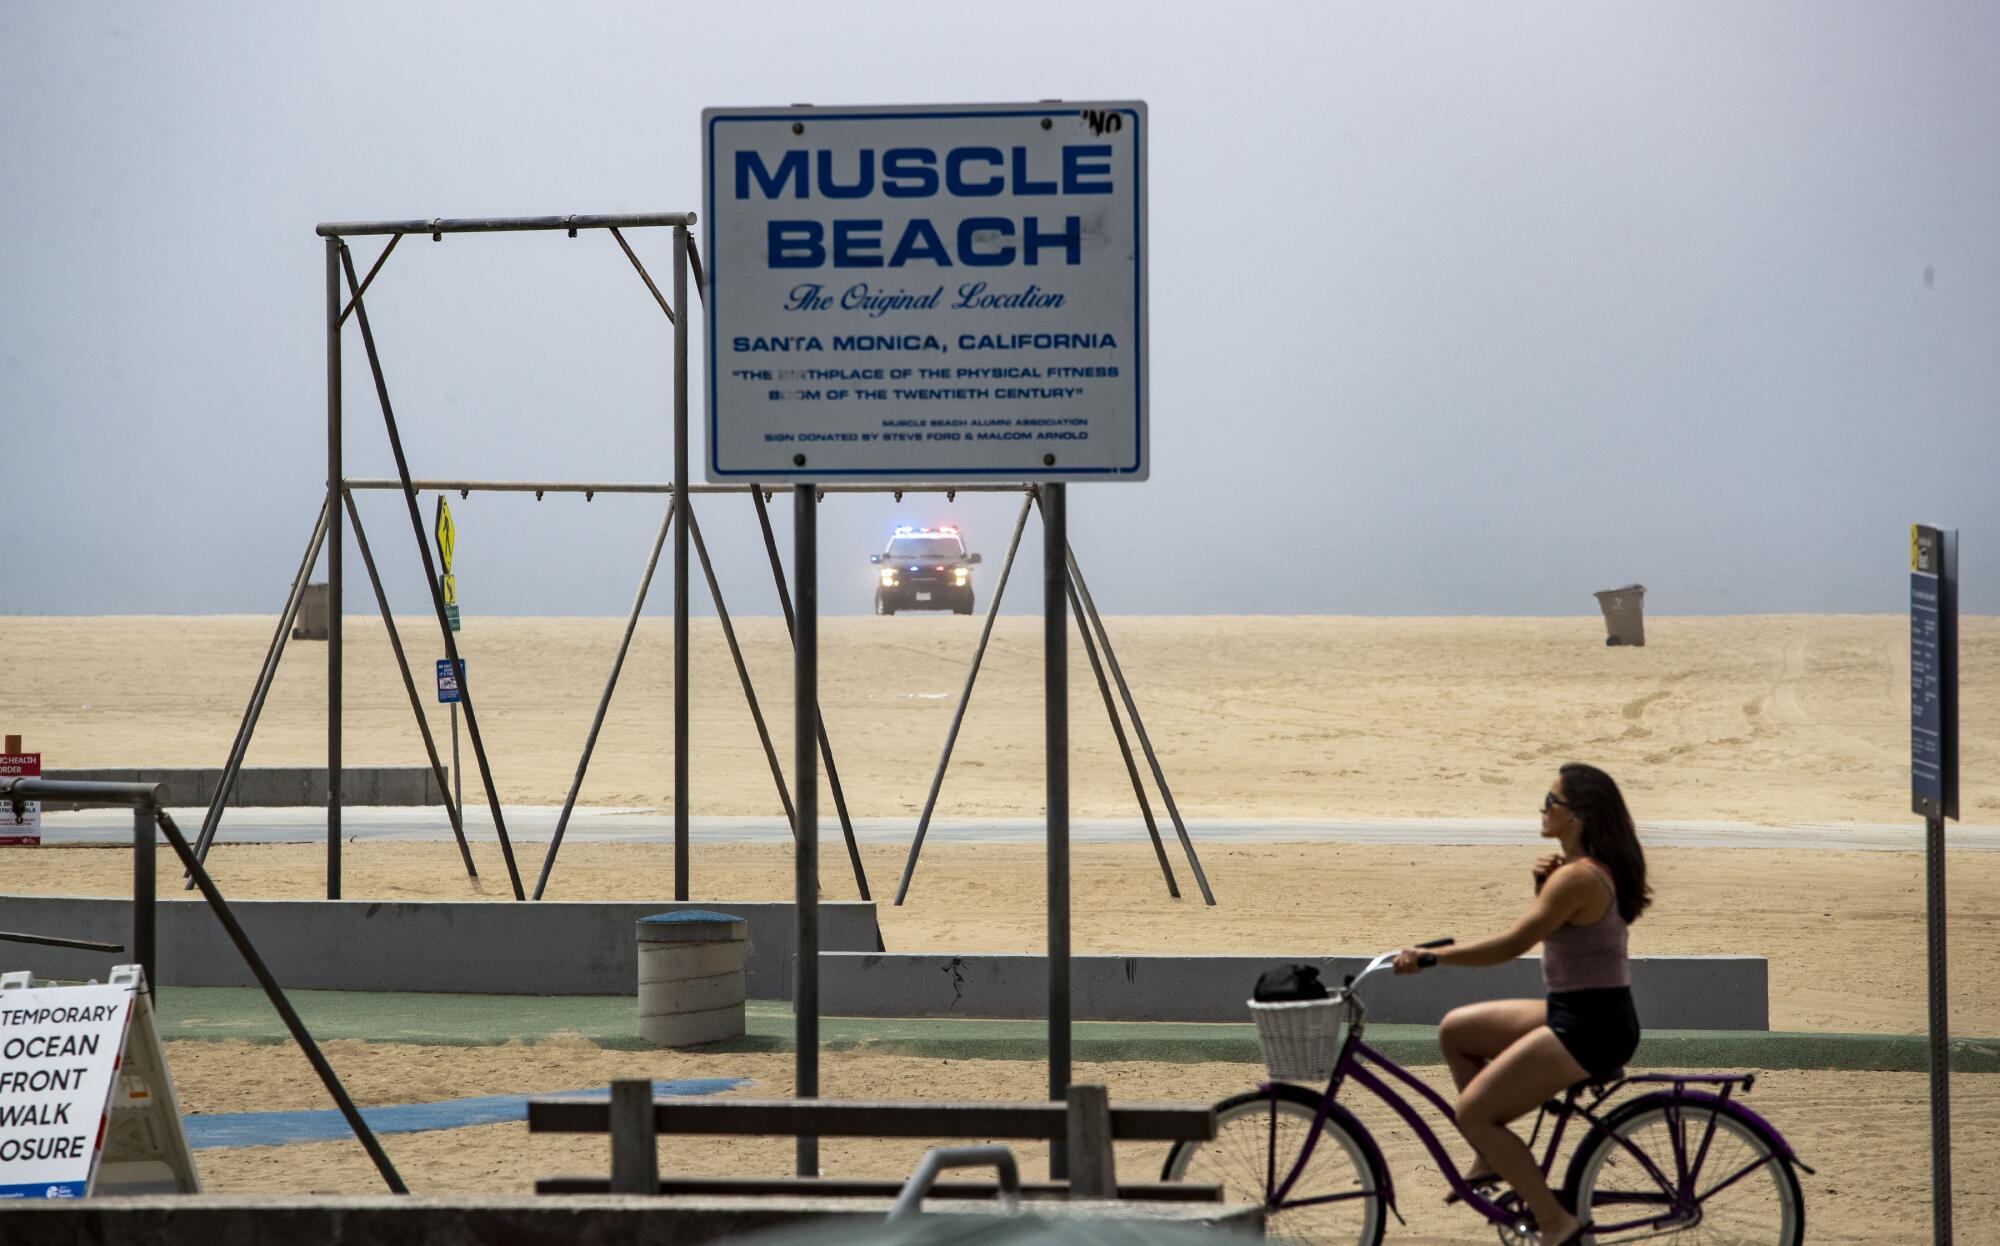 Police keep watch over the empty beach and closed bike path in Santa Monica.